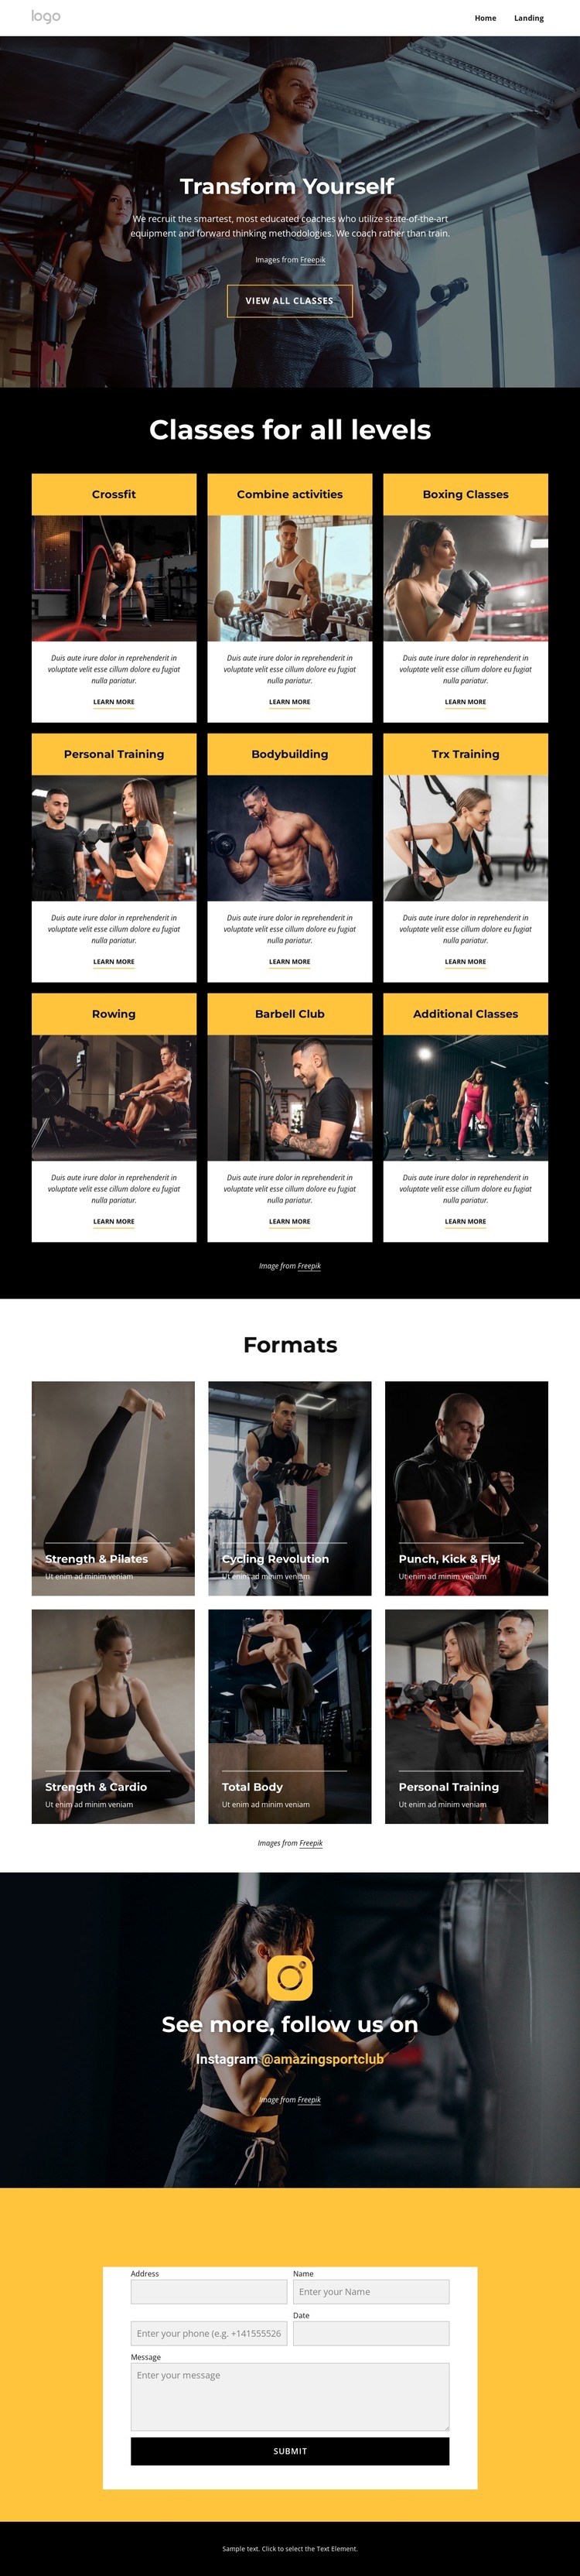 Fitness classes, indoor pools HTML Template